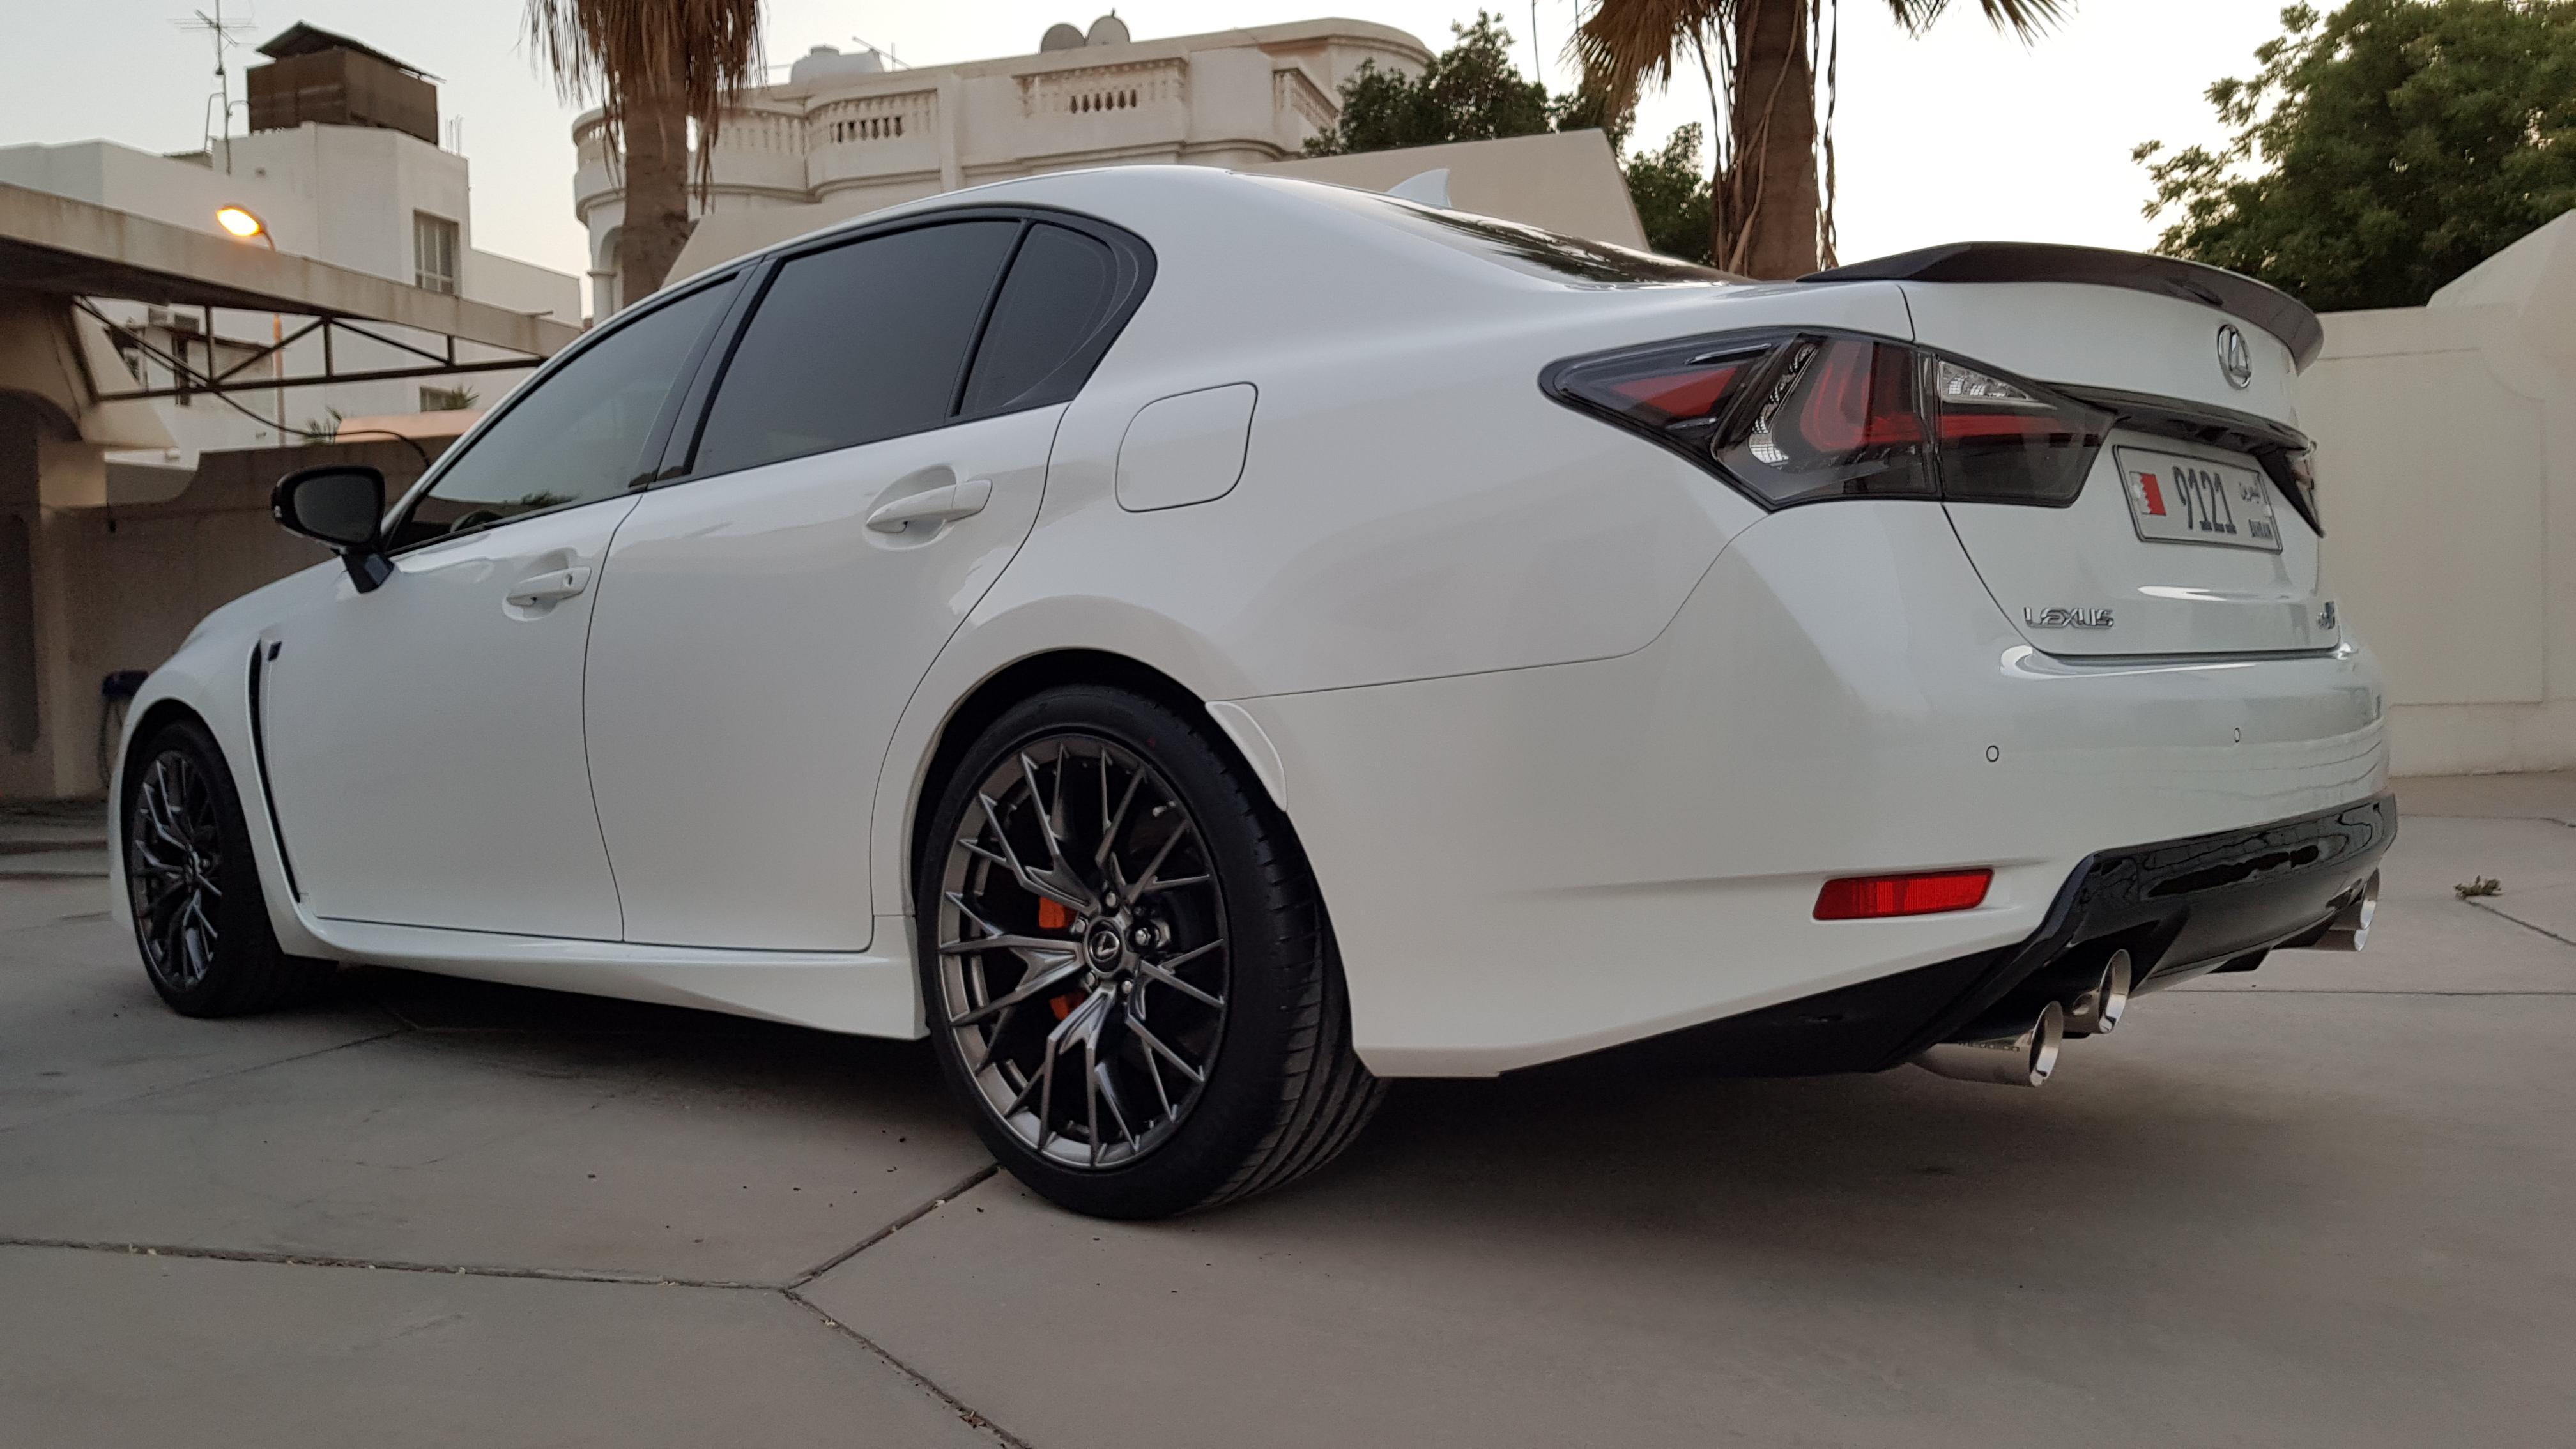 Show Us Your Rides! To All Generation Gs's Lexus GS250